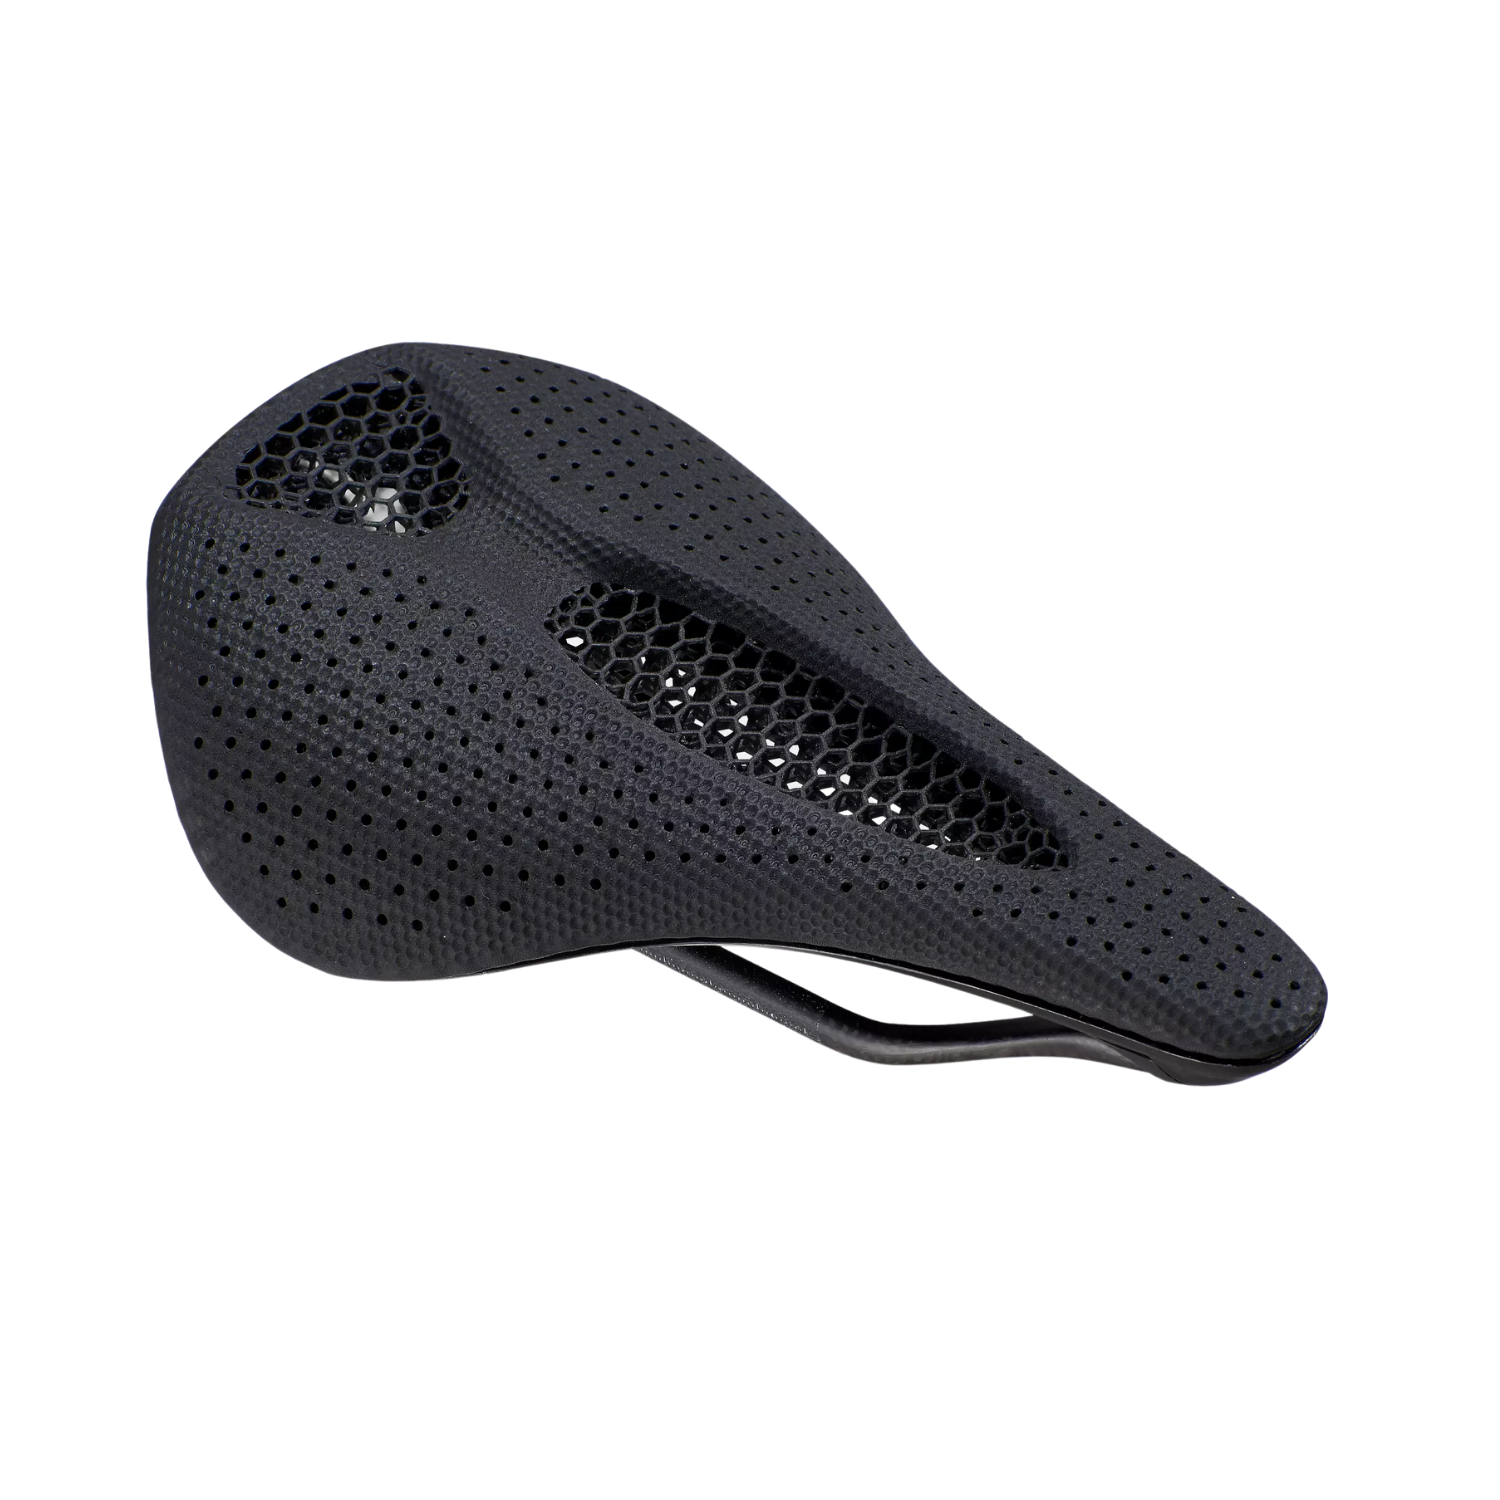 S-WORKS POWER MIRROR SADDLE BLK 143検討させていただきます